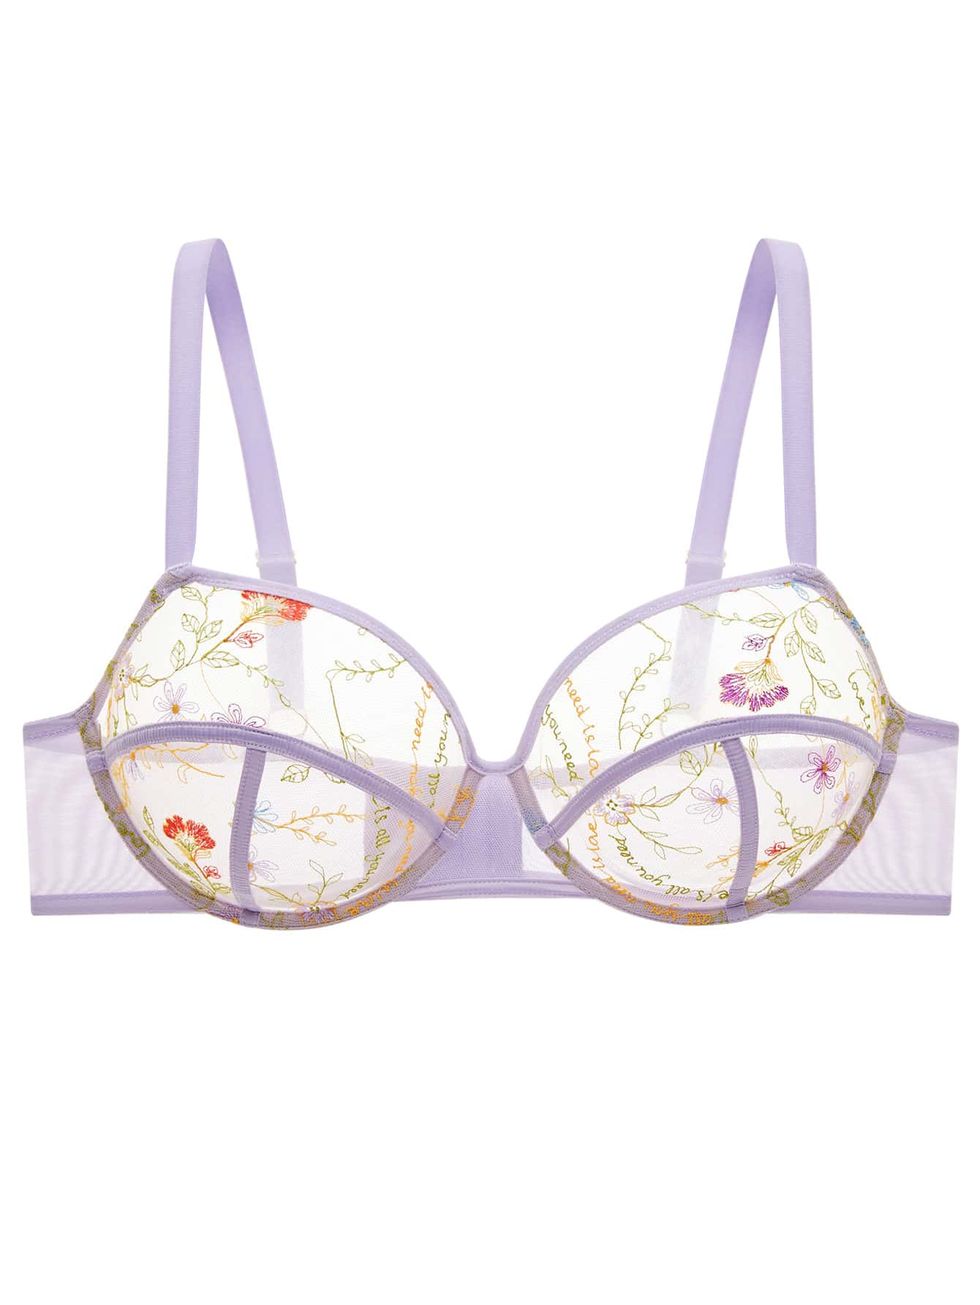 Enchanted Enchanted St Germain Underwire Bra - Lilac